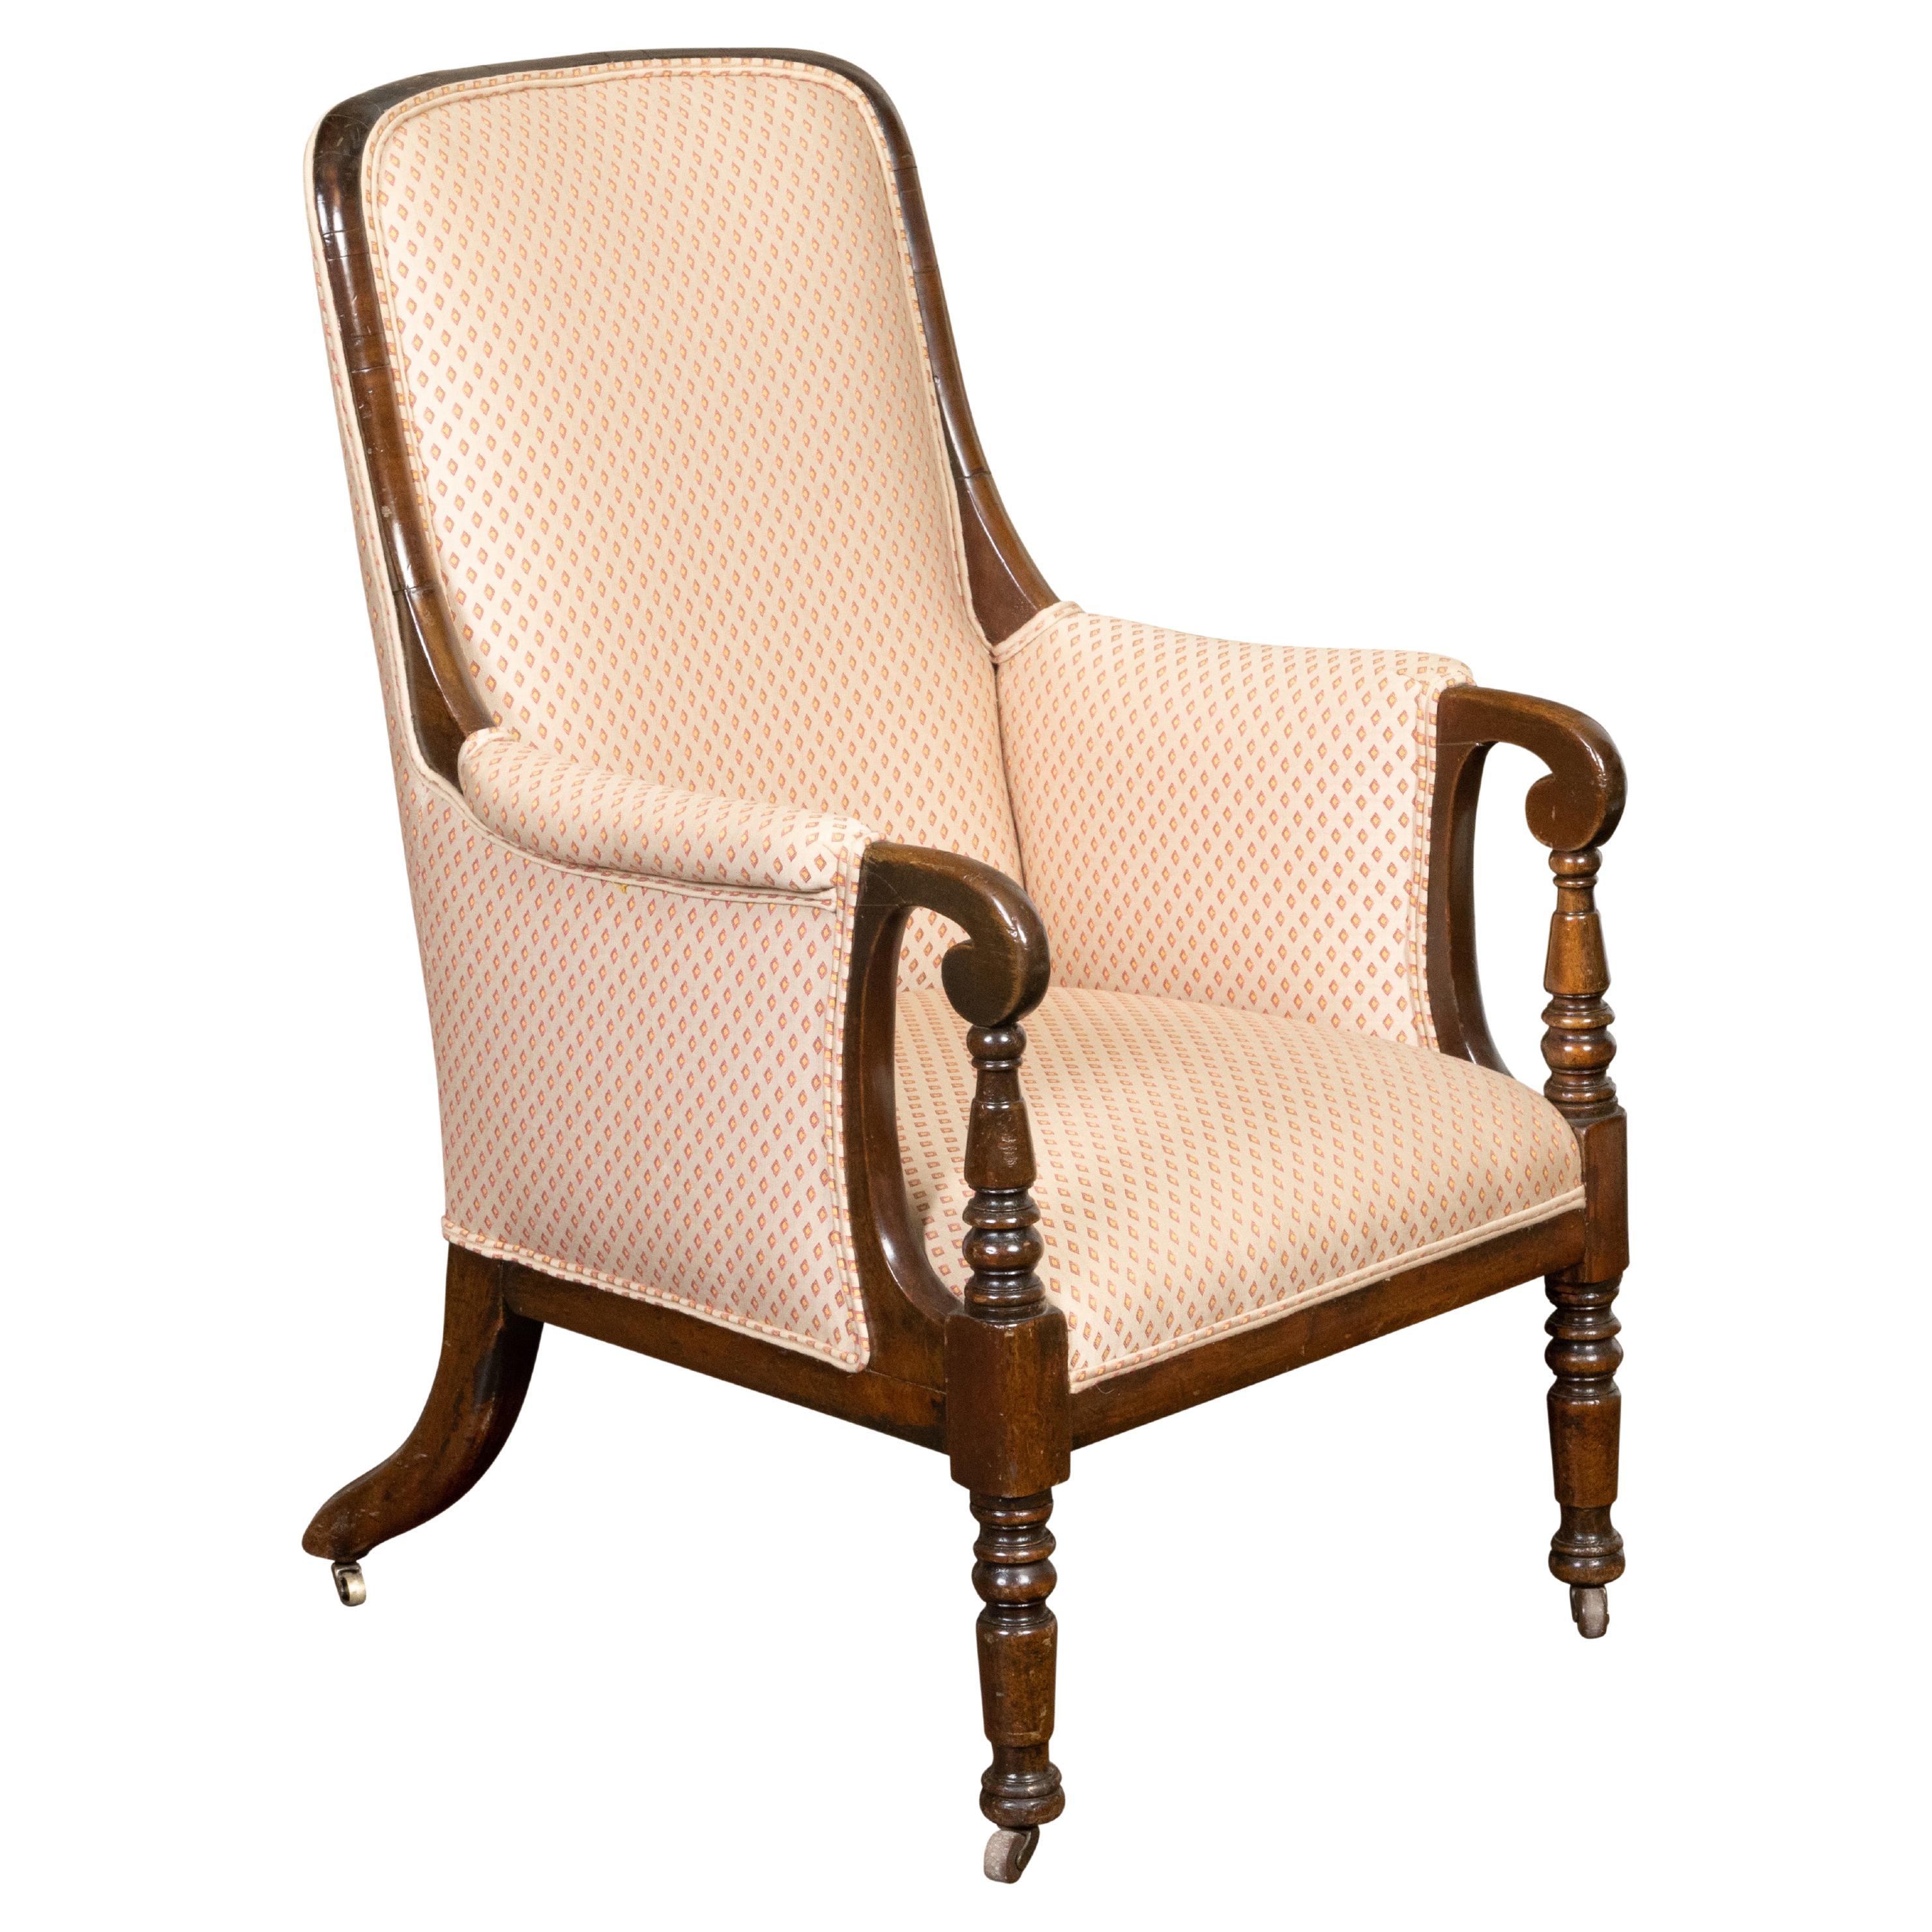 English Regency 1830s Mahogany Armchair with Scrolling Arms and Casters For Sale